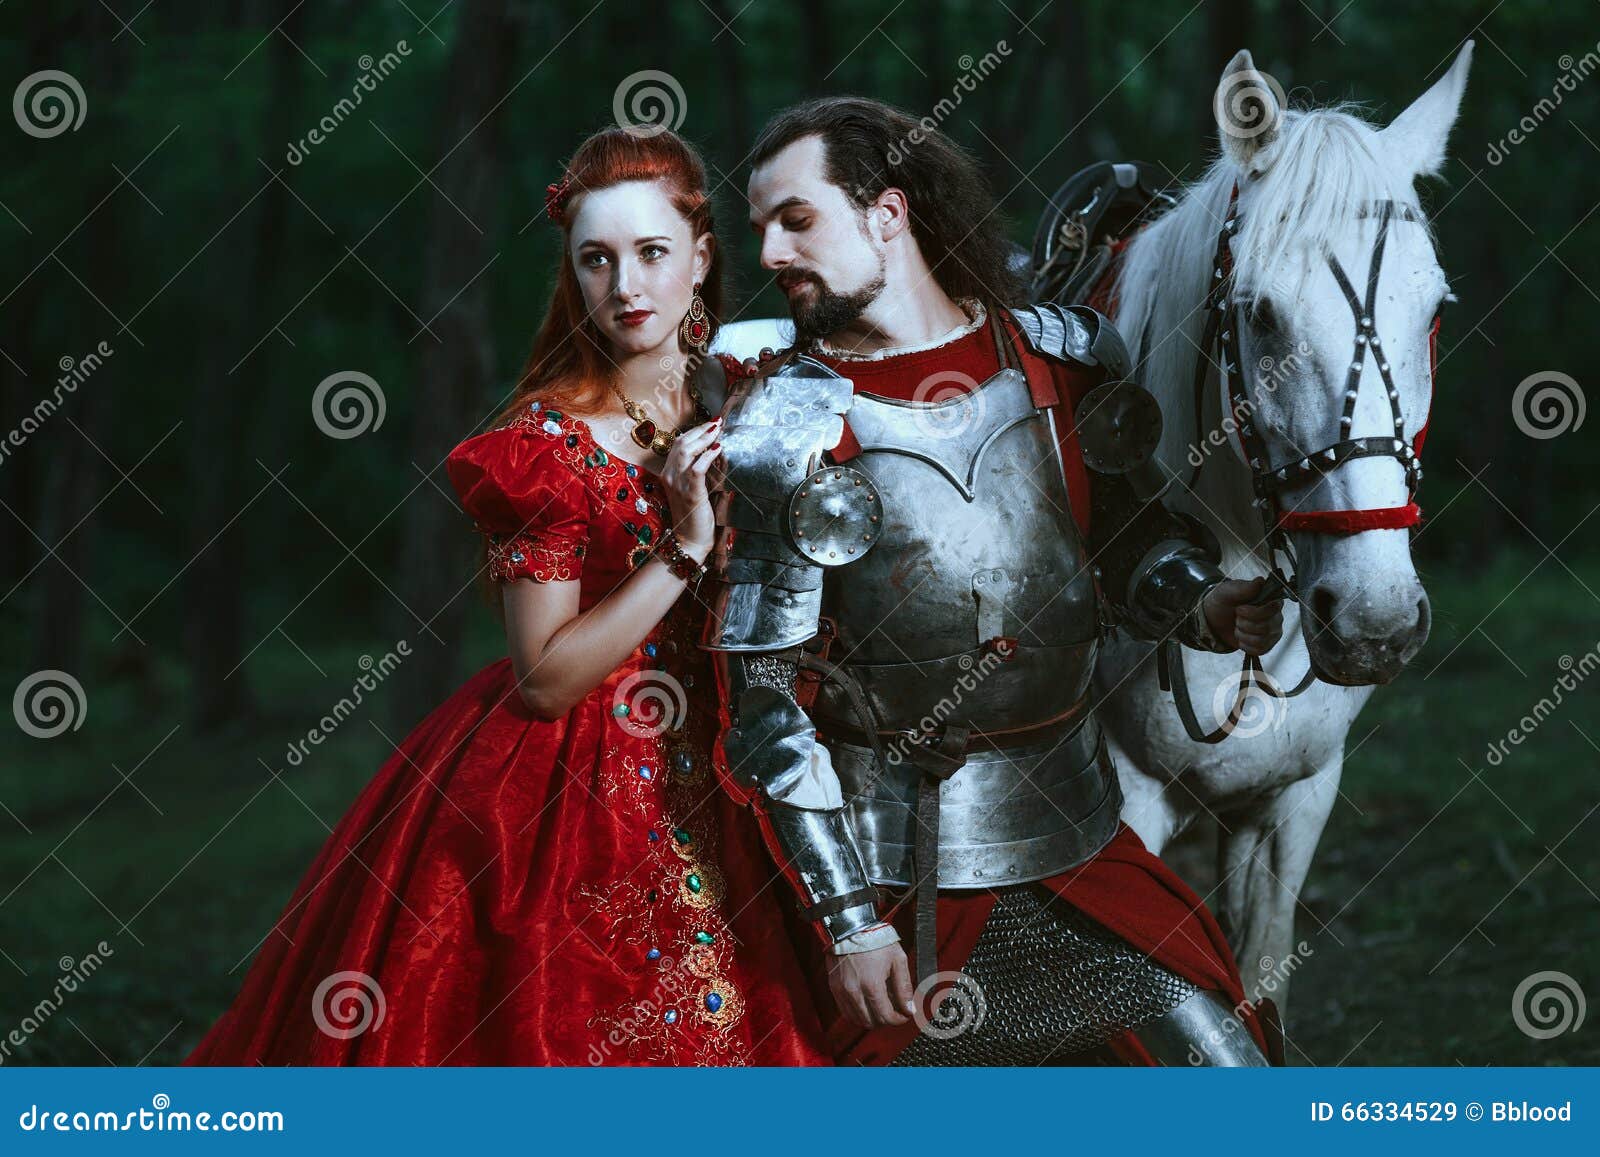 medieval knight with lady